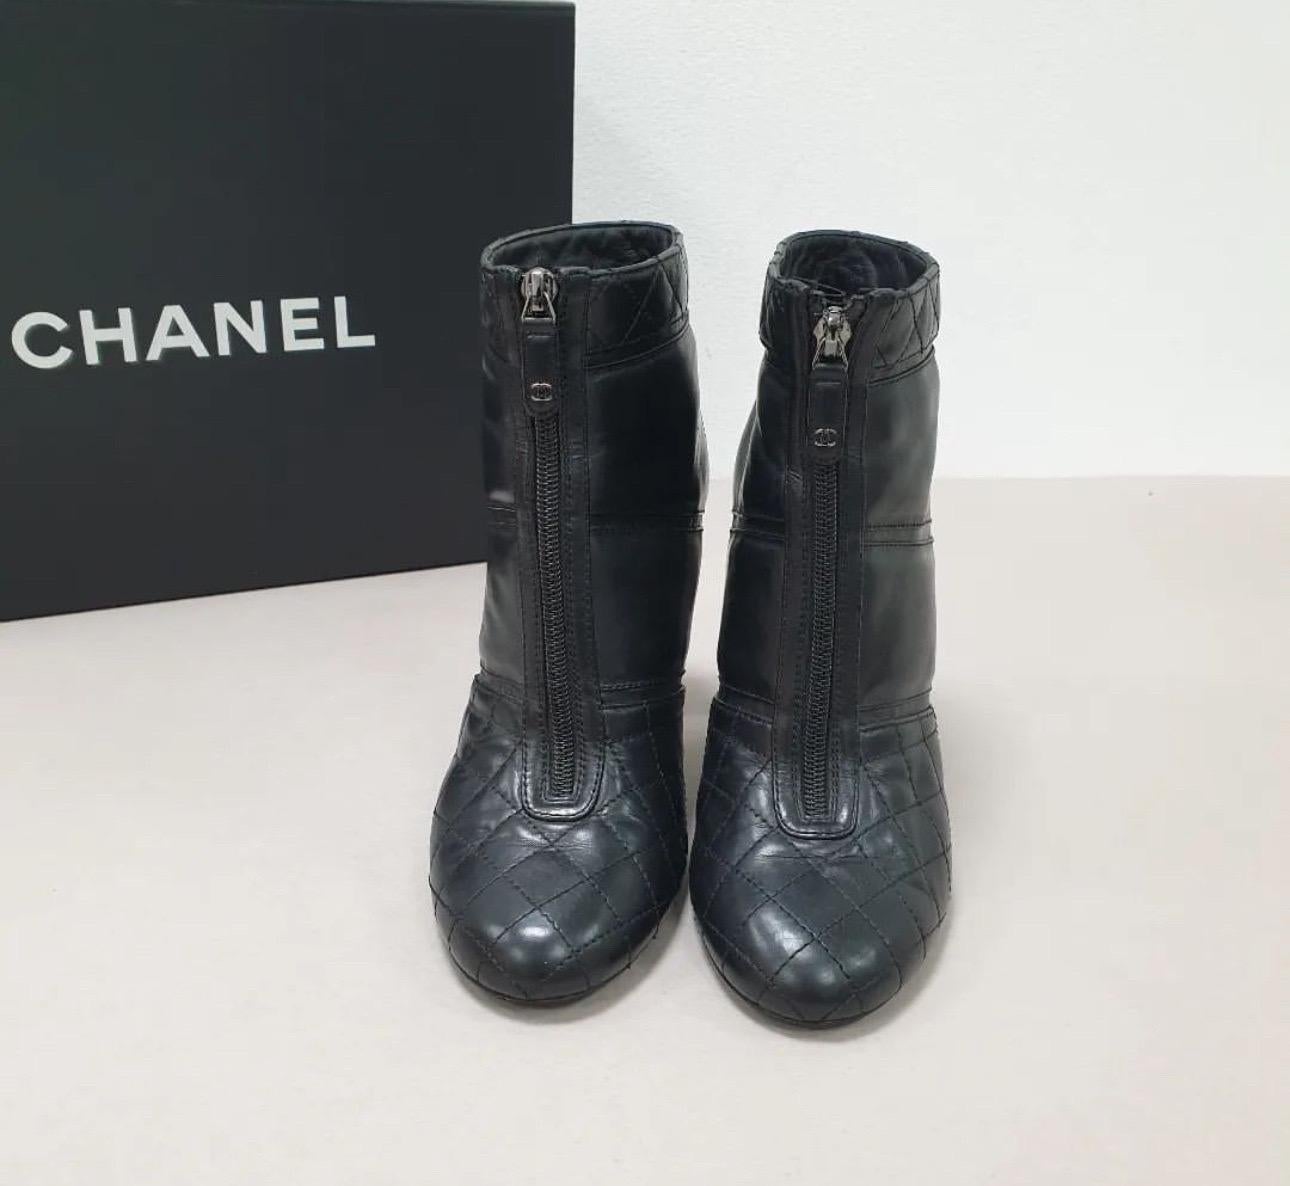 Chanel 12A Matelasse Leather Front Zip Heel Boots Pumps In Good Condition For Sale In Krakow, PL